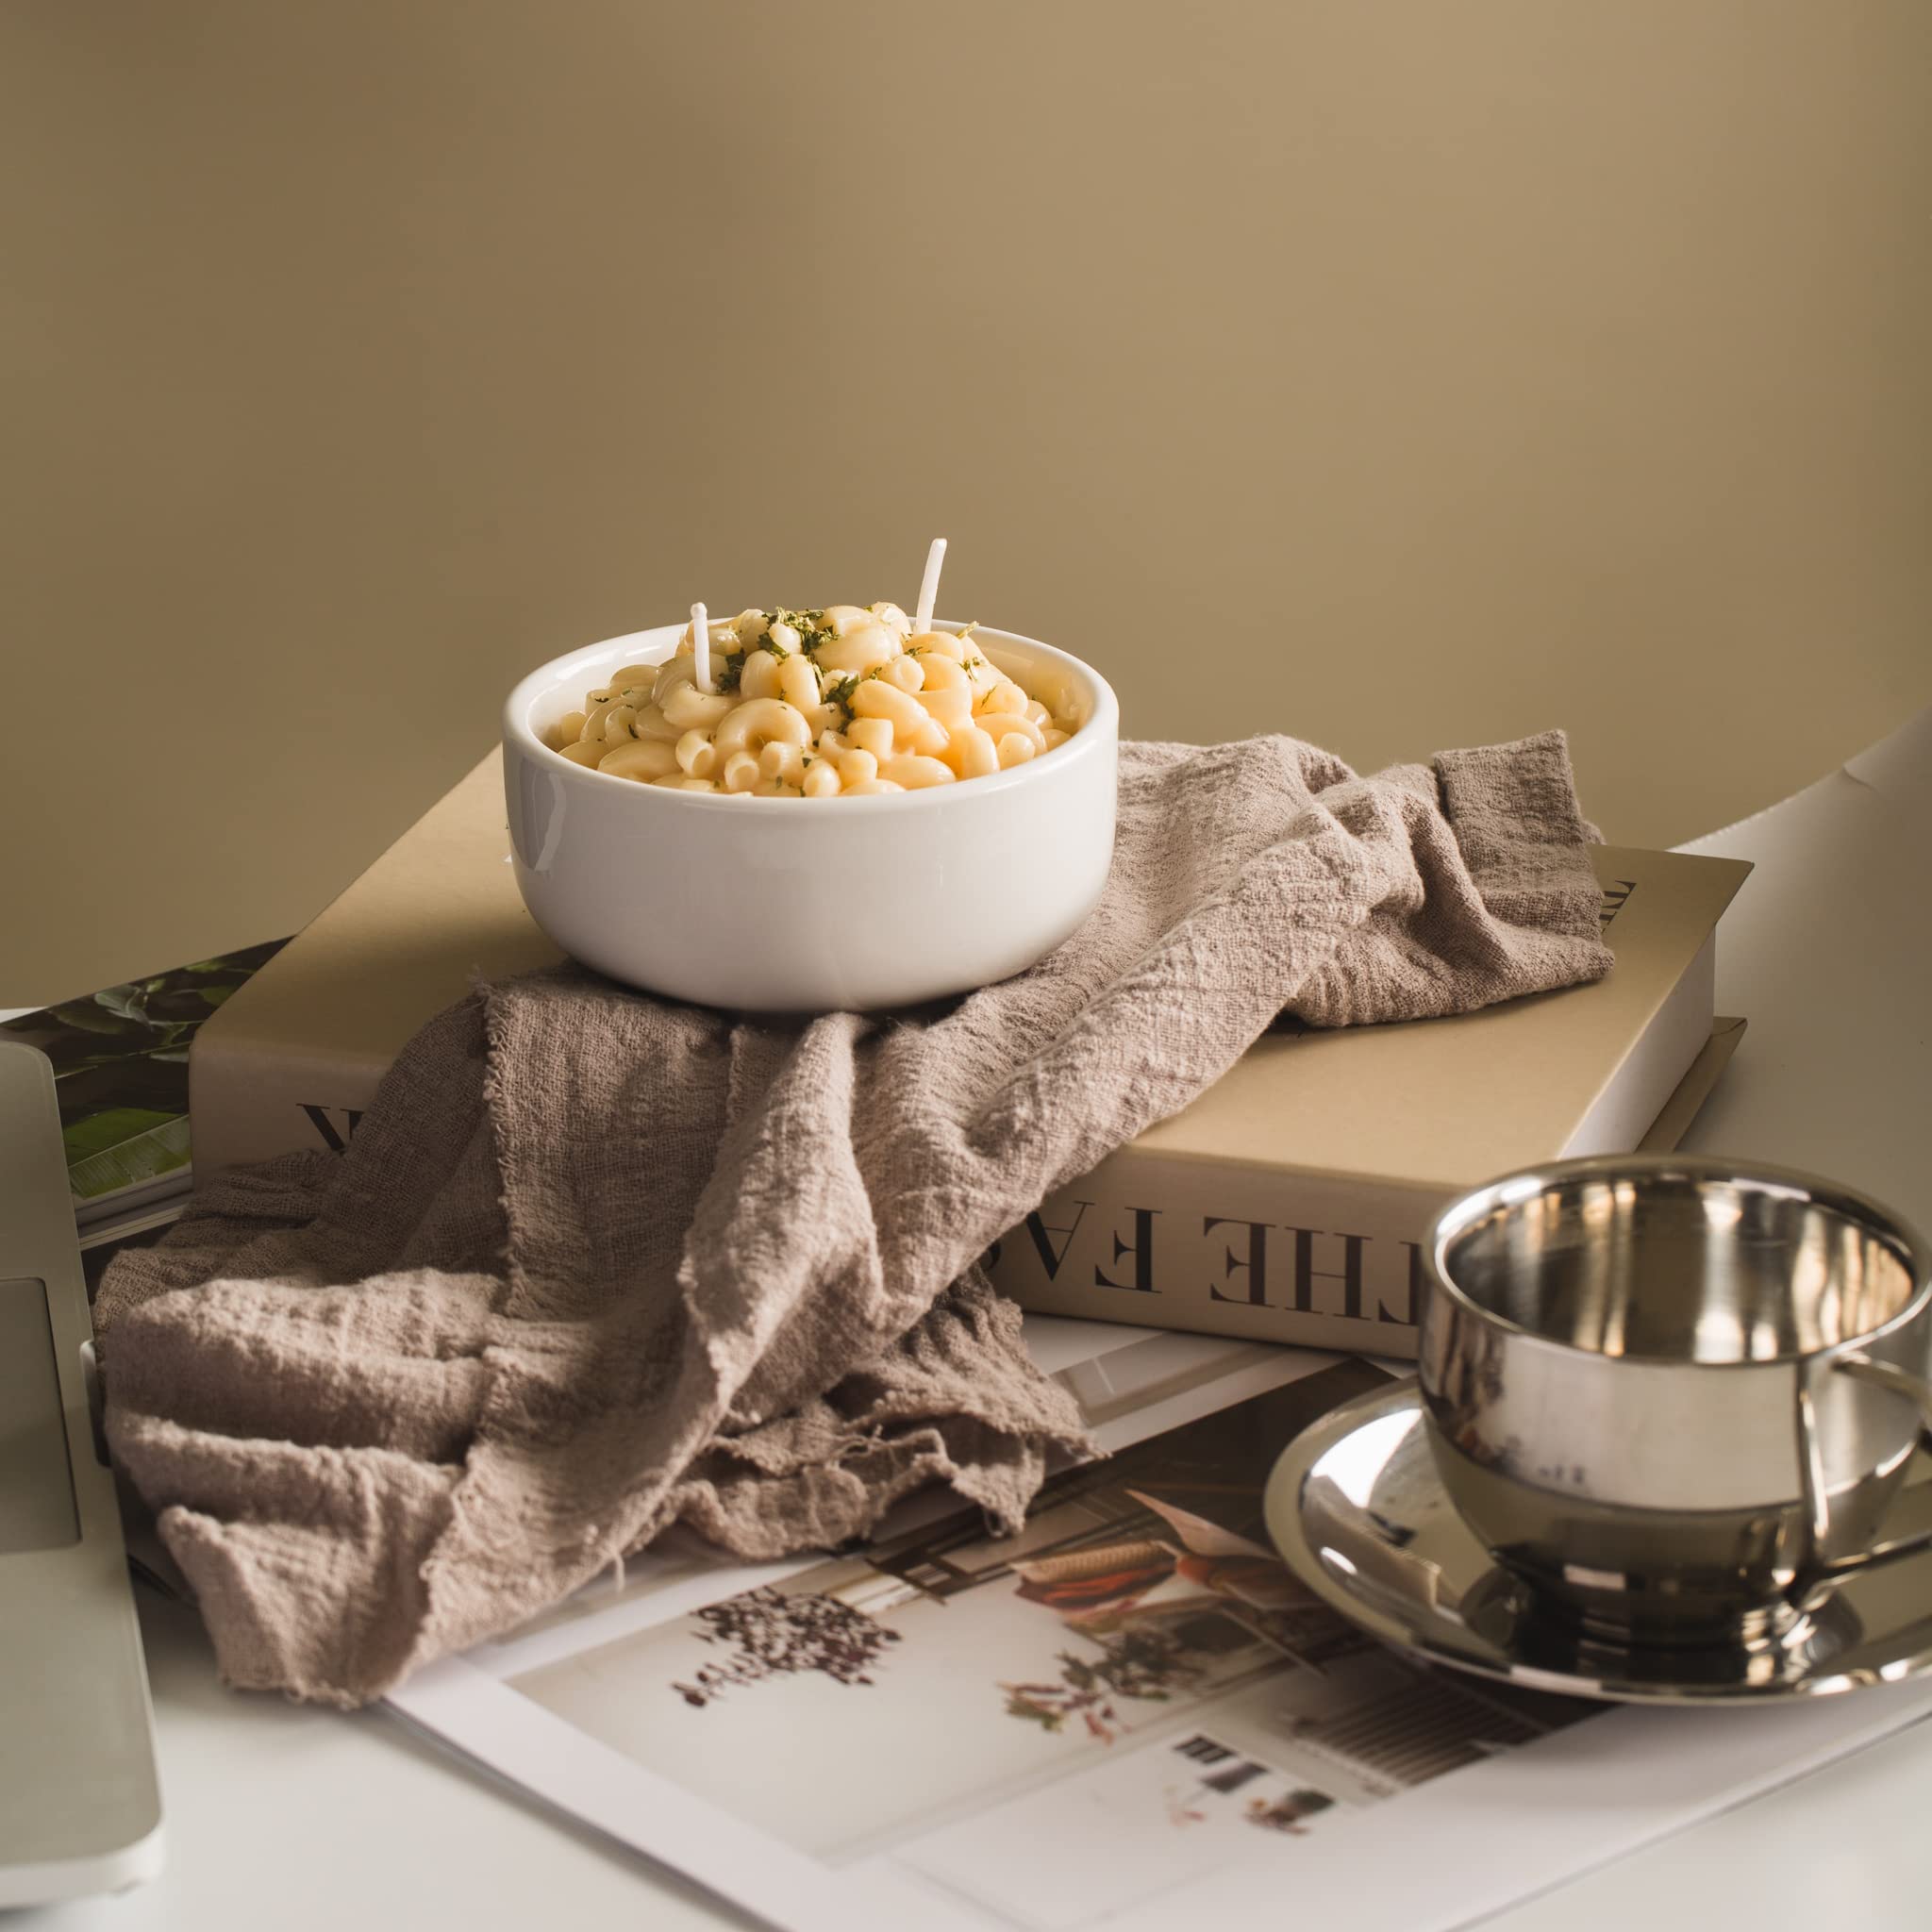 Macaroni Macaroni and Cheese Pasta Bowl Scented Candle Ritual Gift for Your Lovers Friends